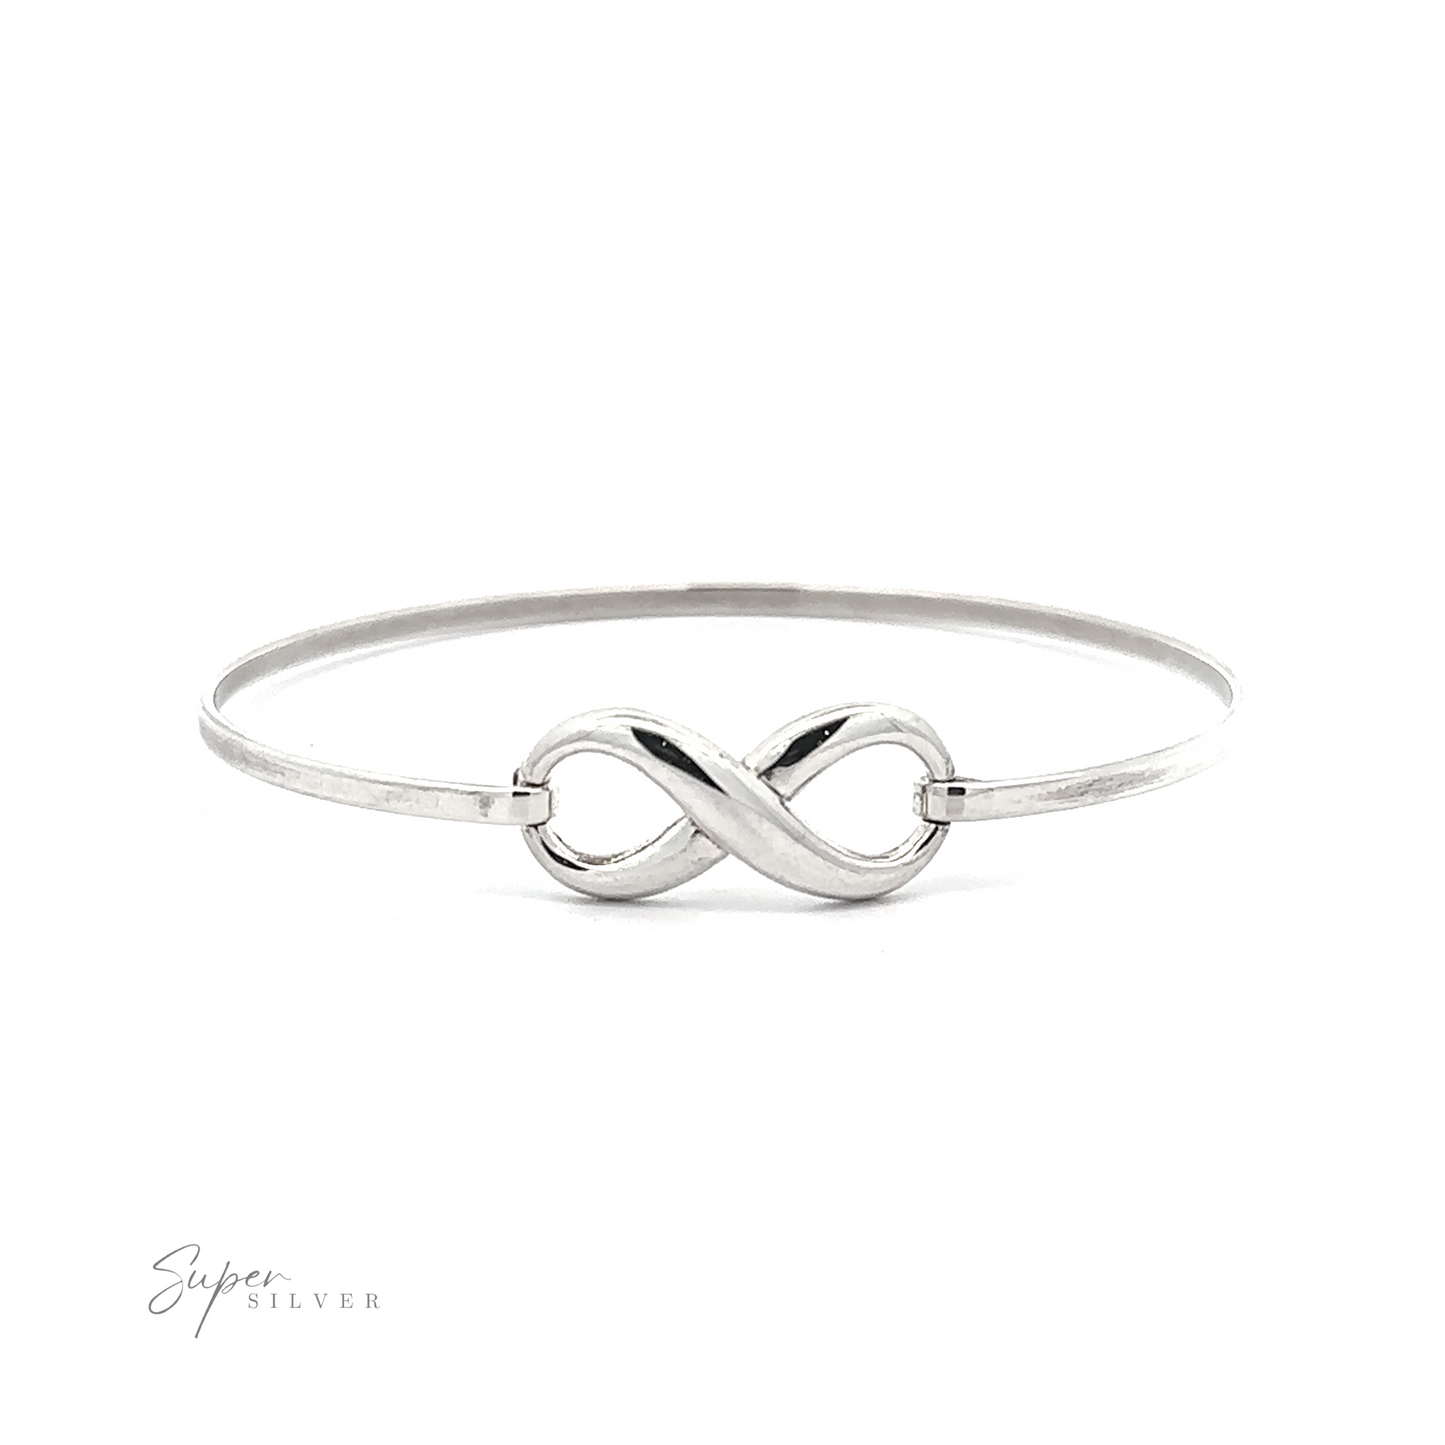 
                  
                    A sterling silver Infinity Bracelet featuring an infinity knot in the center against a white background. The brand name "Super Silver" is elegantly written in the bottom left corner.
                  
                